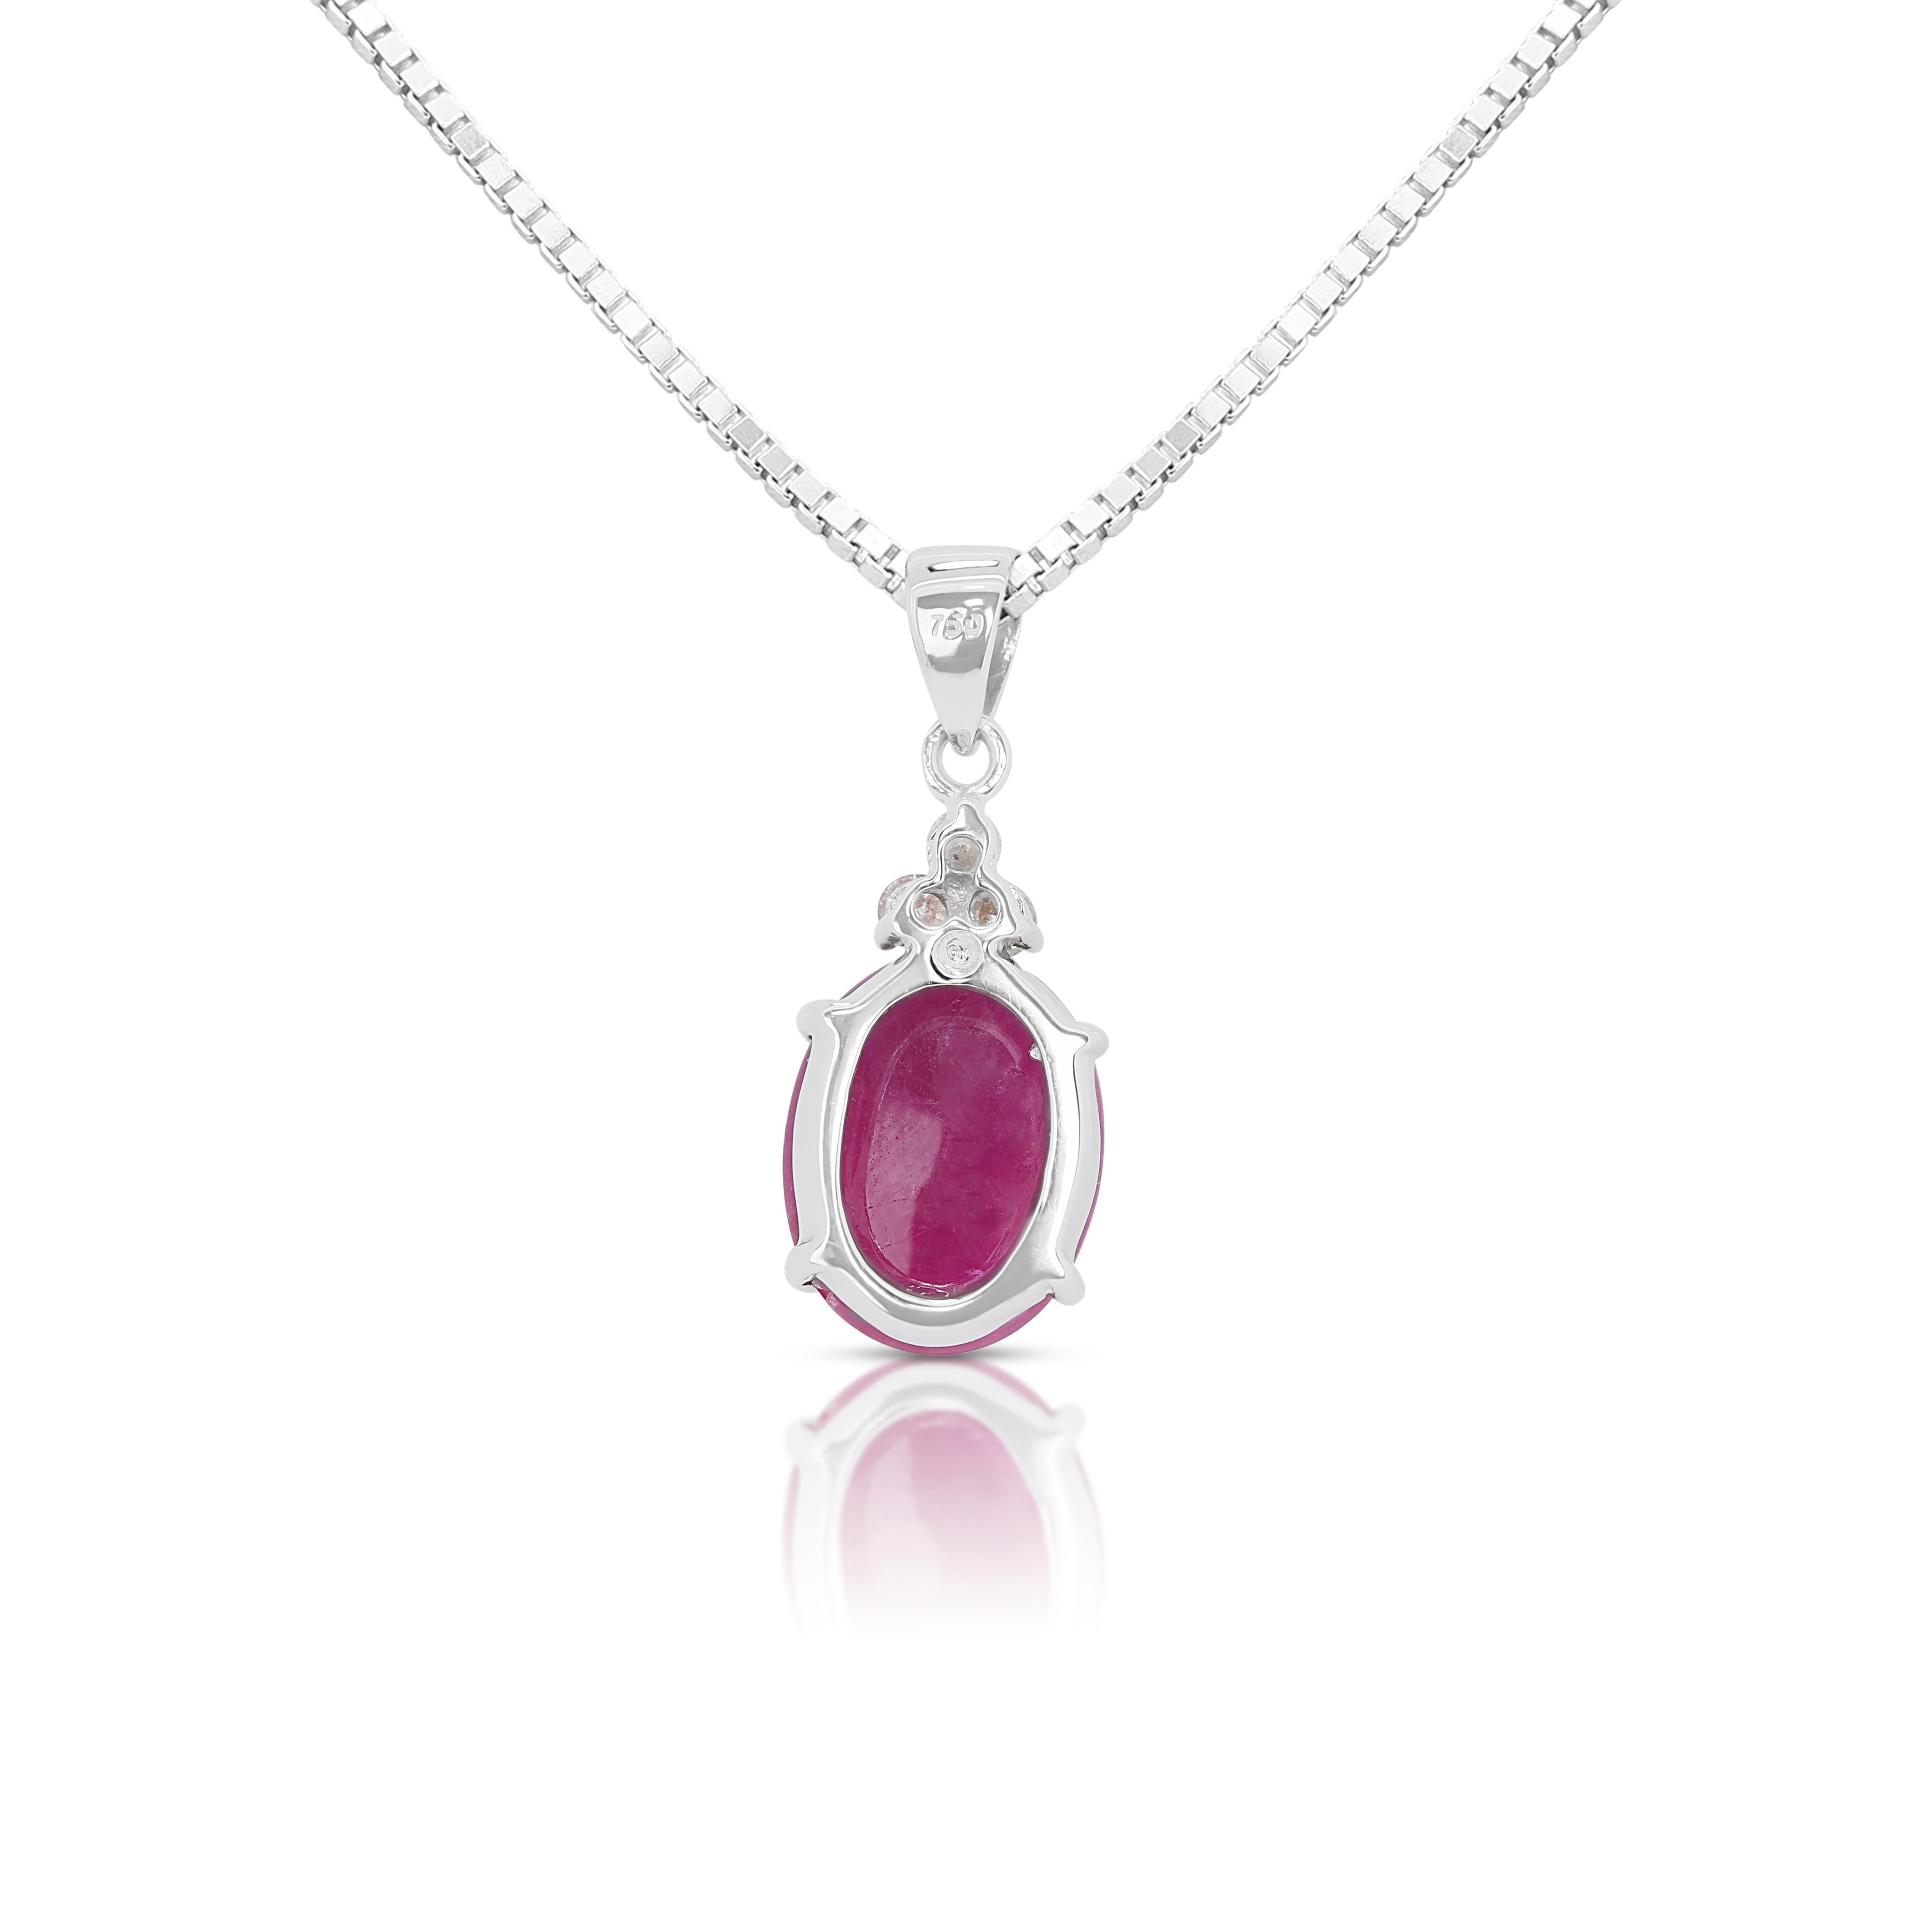 Elegant 0.40ct Ruby Pendant with Diamonds in 18K White Gold - Chain Not Included 1